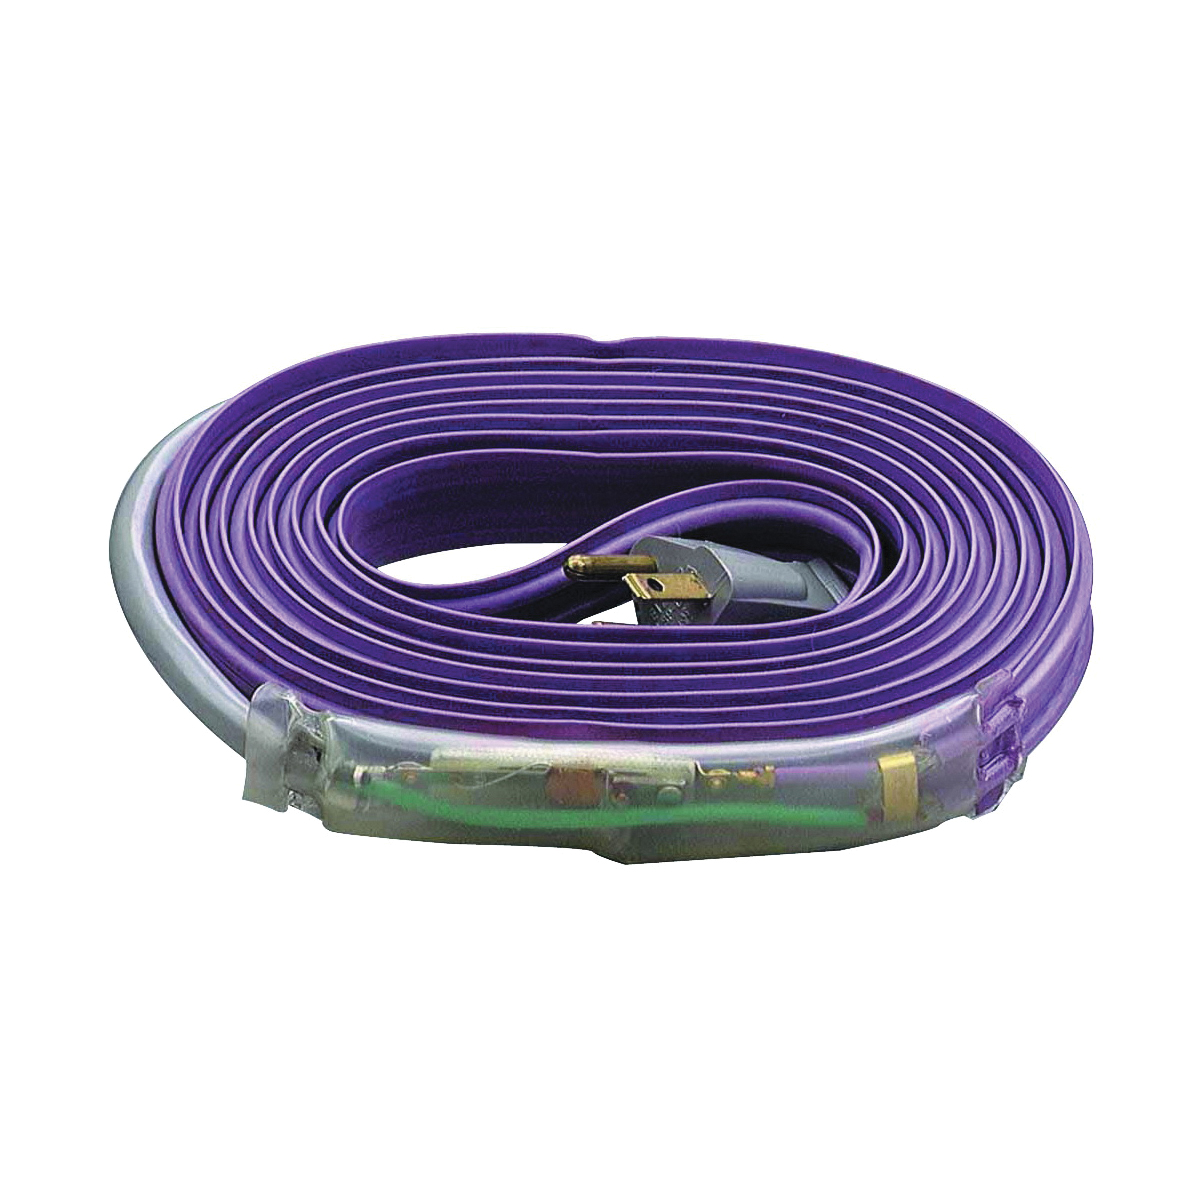 04325 Pipe Heating Cable, 6 ft L